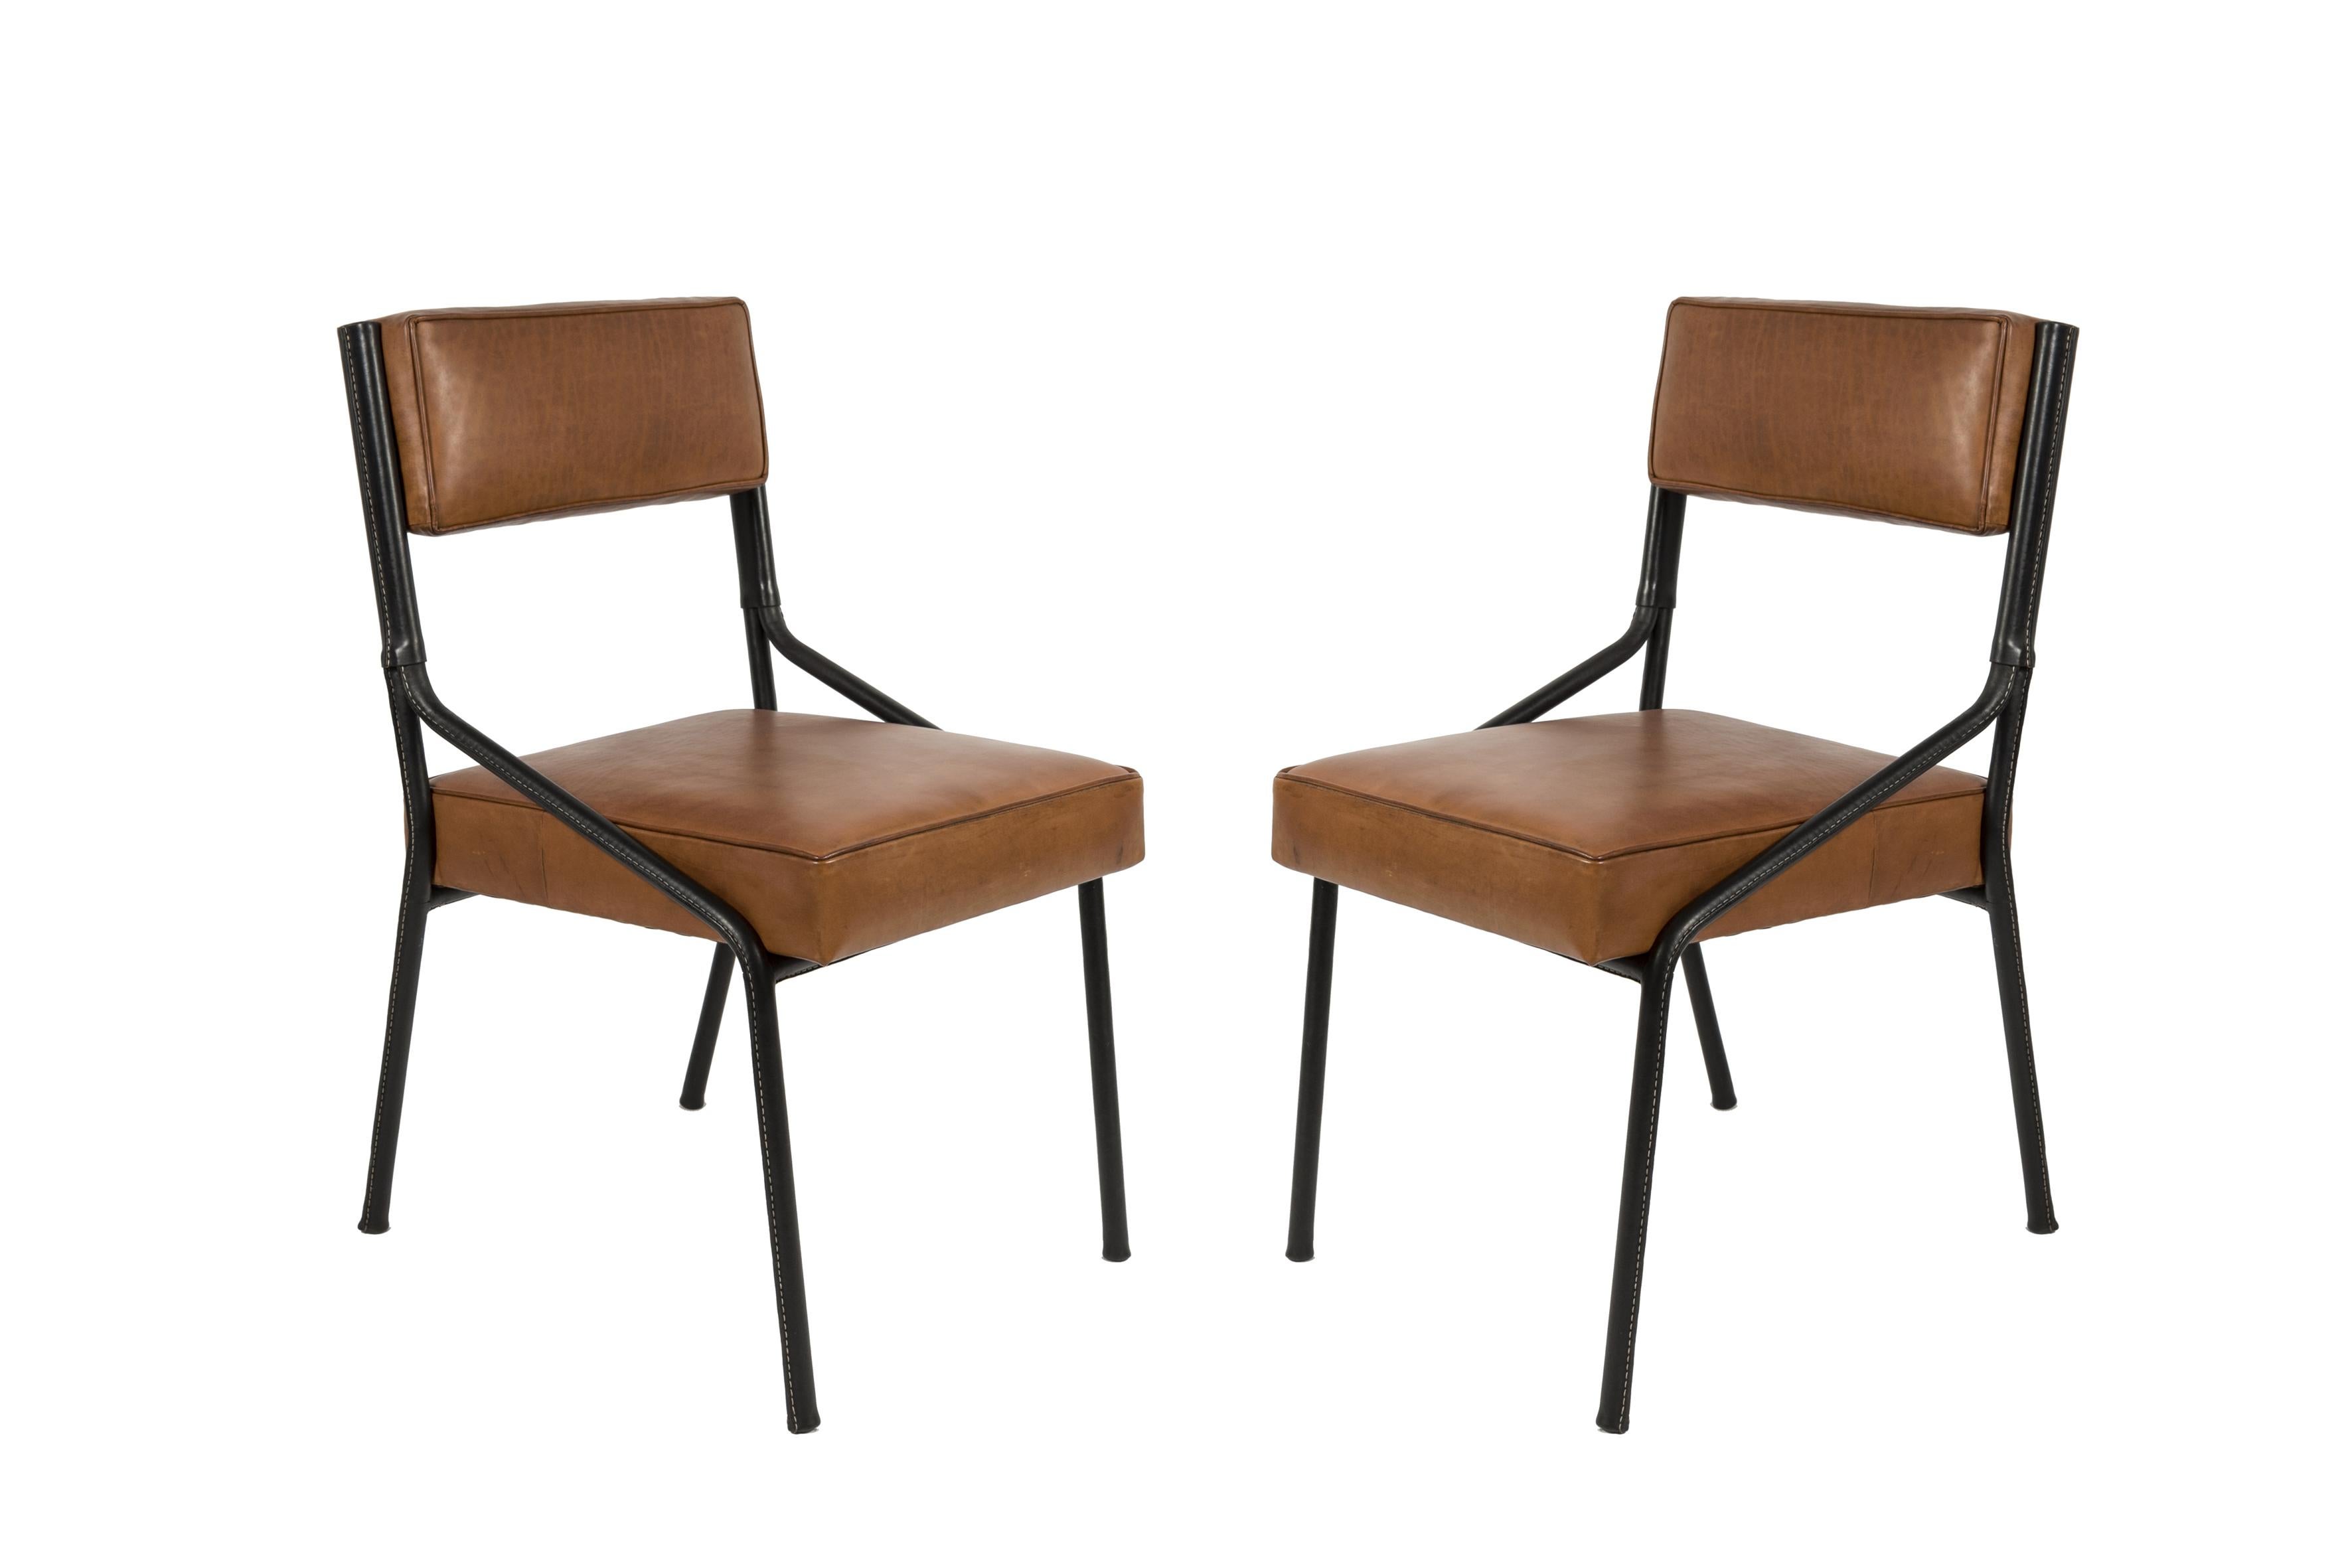 1950's Stitched Leather Chairs by Jacques Adnet 2